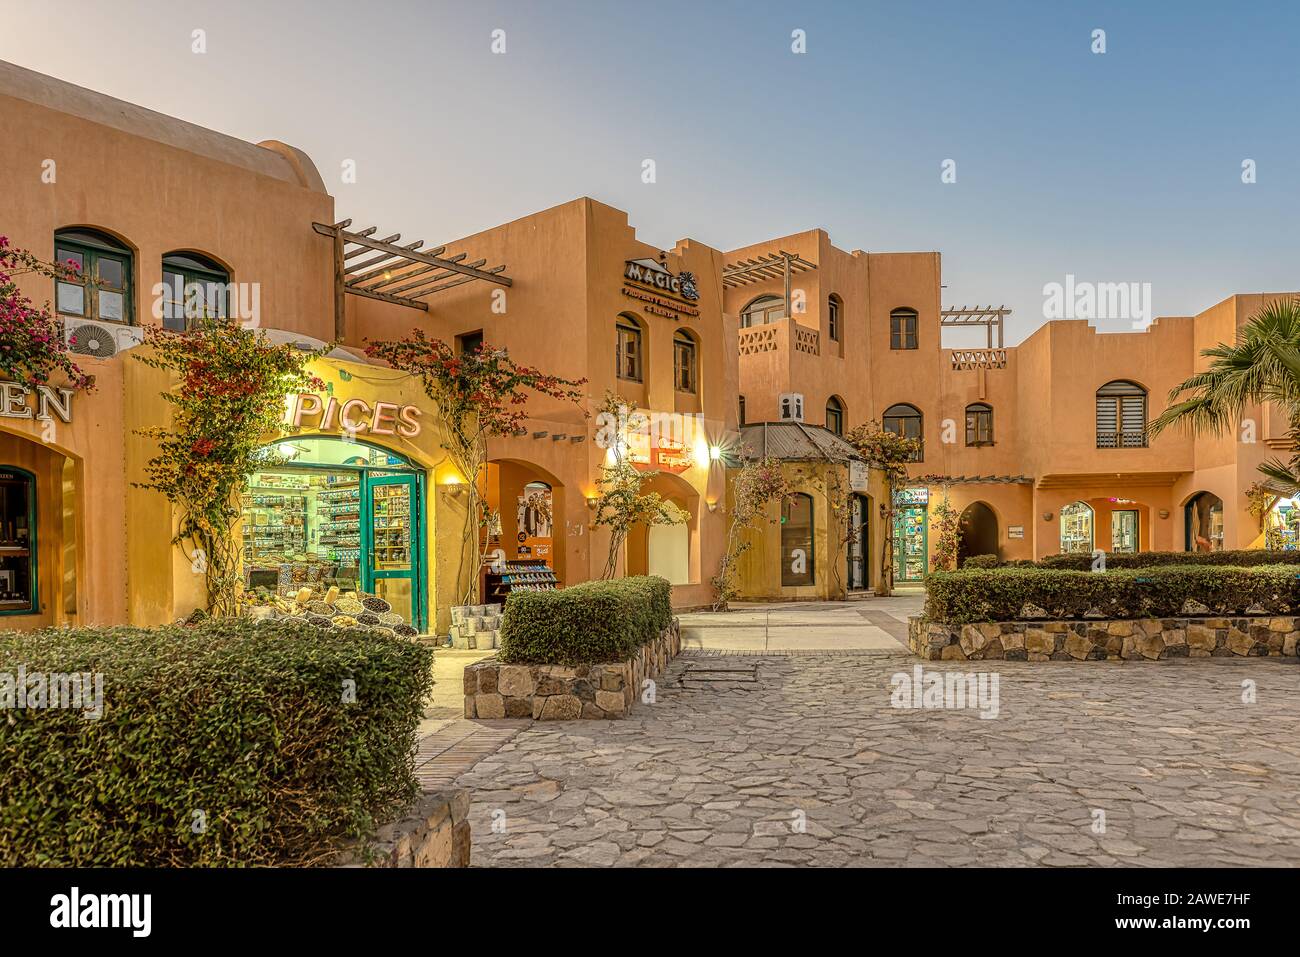 shops and buildings at an egyptian square in the twilight sunset, el Gouna, Egypt, January 16, 2020 Stock Photo